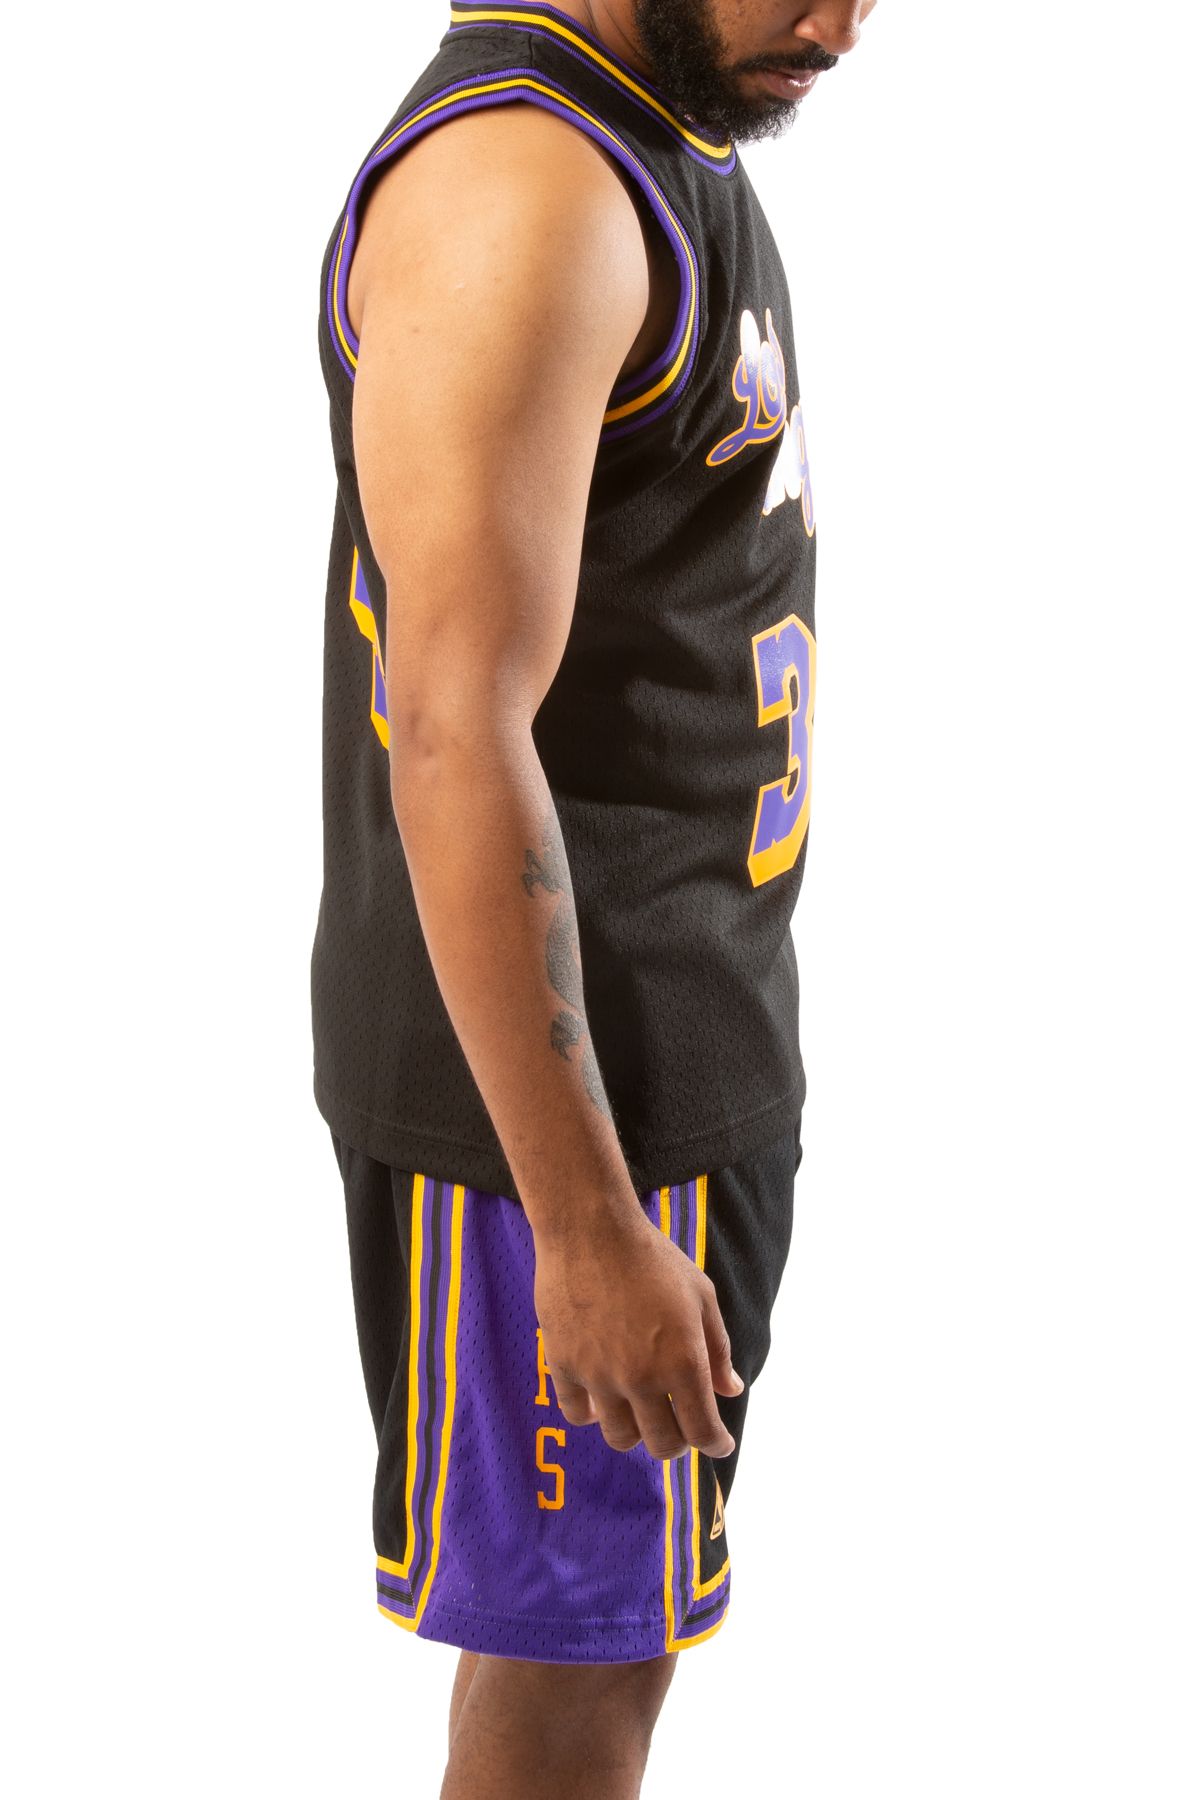 MITCHELL AND NESS Los Angeles Lakers Swingman Jersey  SMJYCP19273-LALBLCK96SON - Shiekh